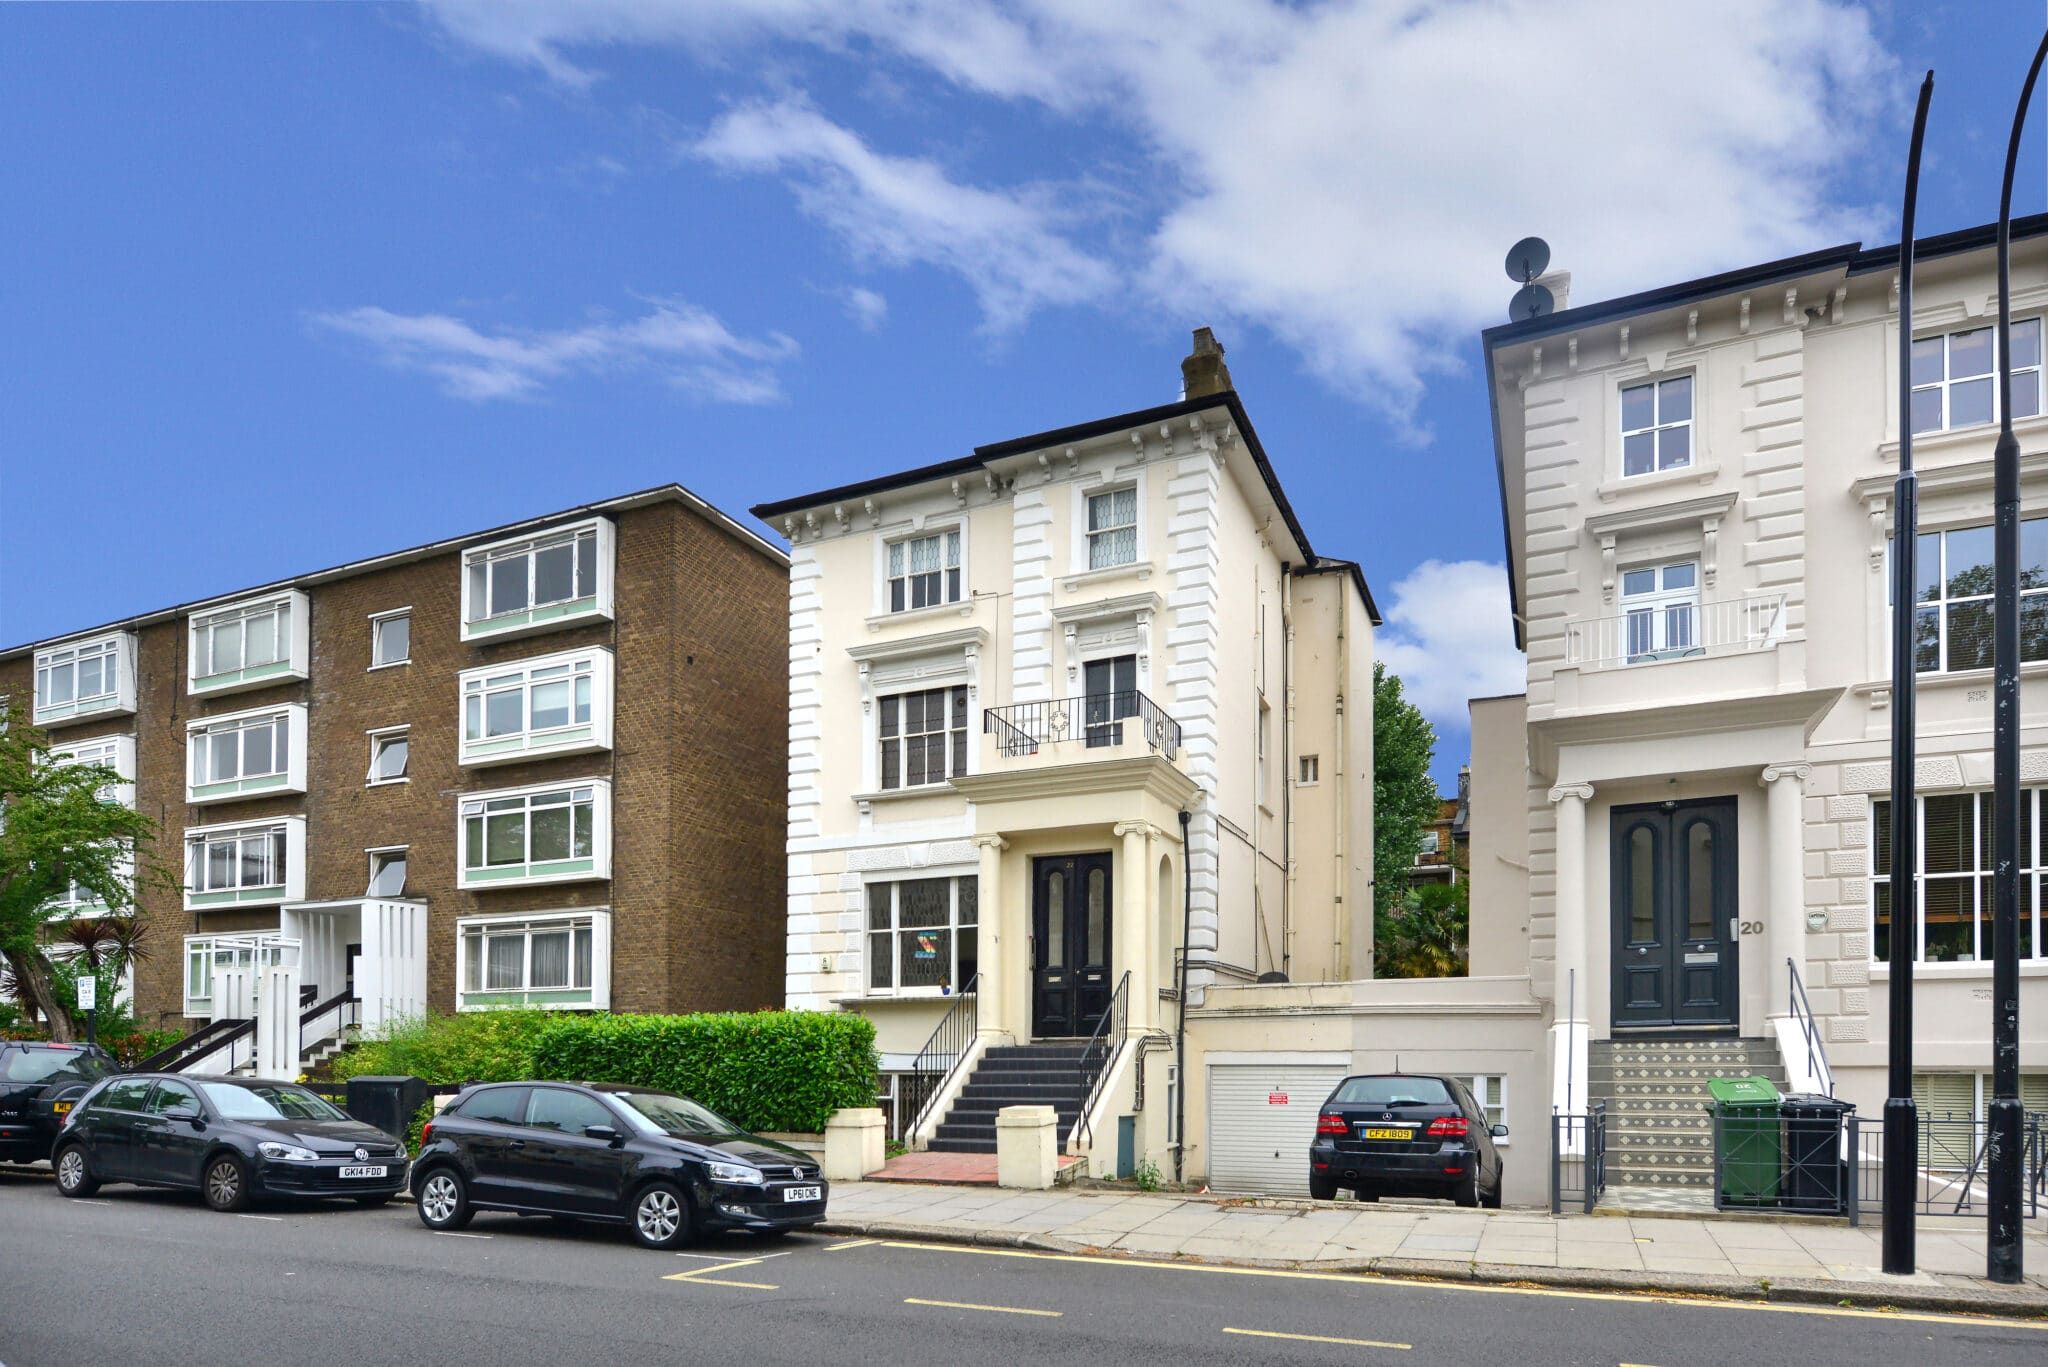 Buckland Crescent, London, NW3 5DX